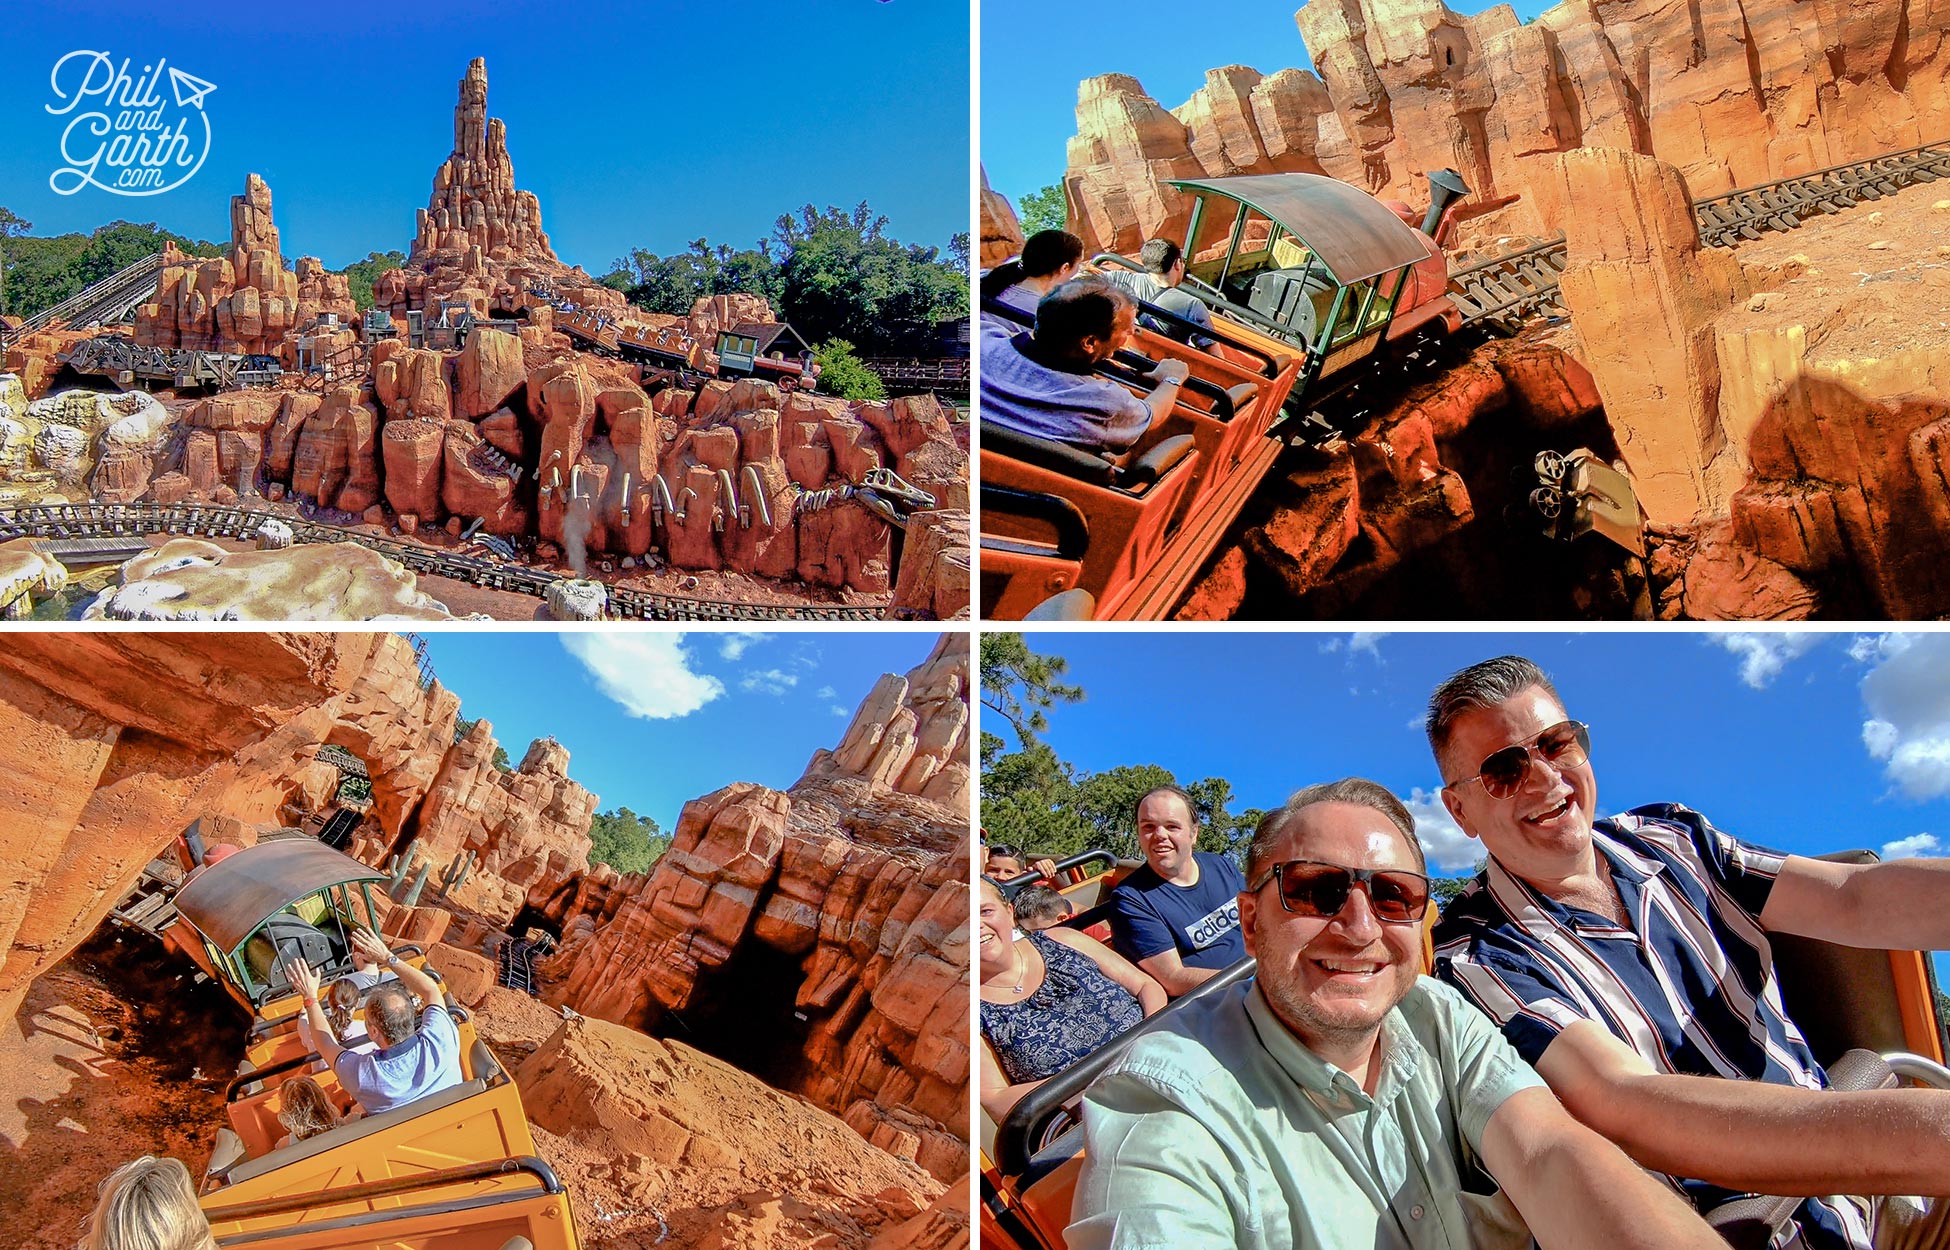 Having the best time on the excellent Big Thunder Mountain rollercoaster